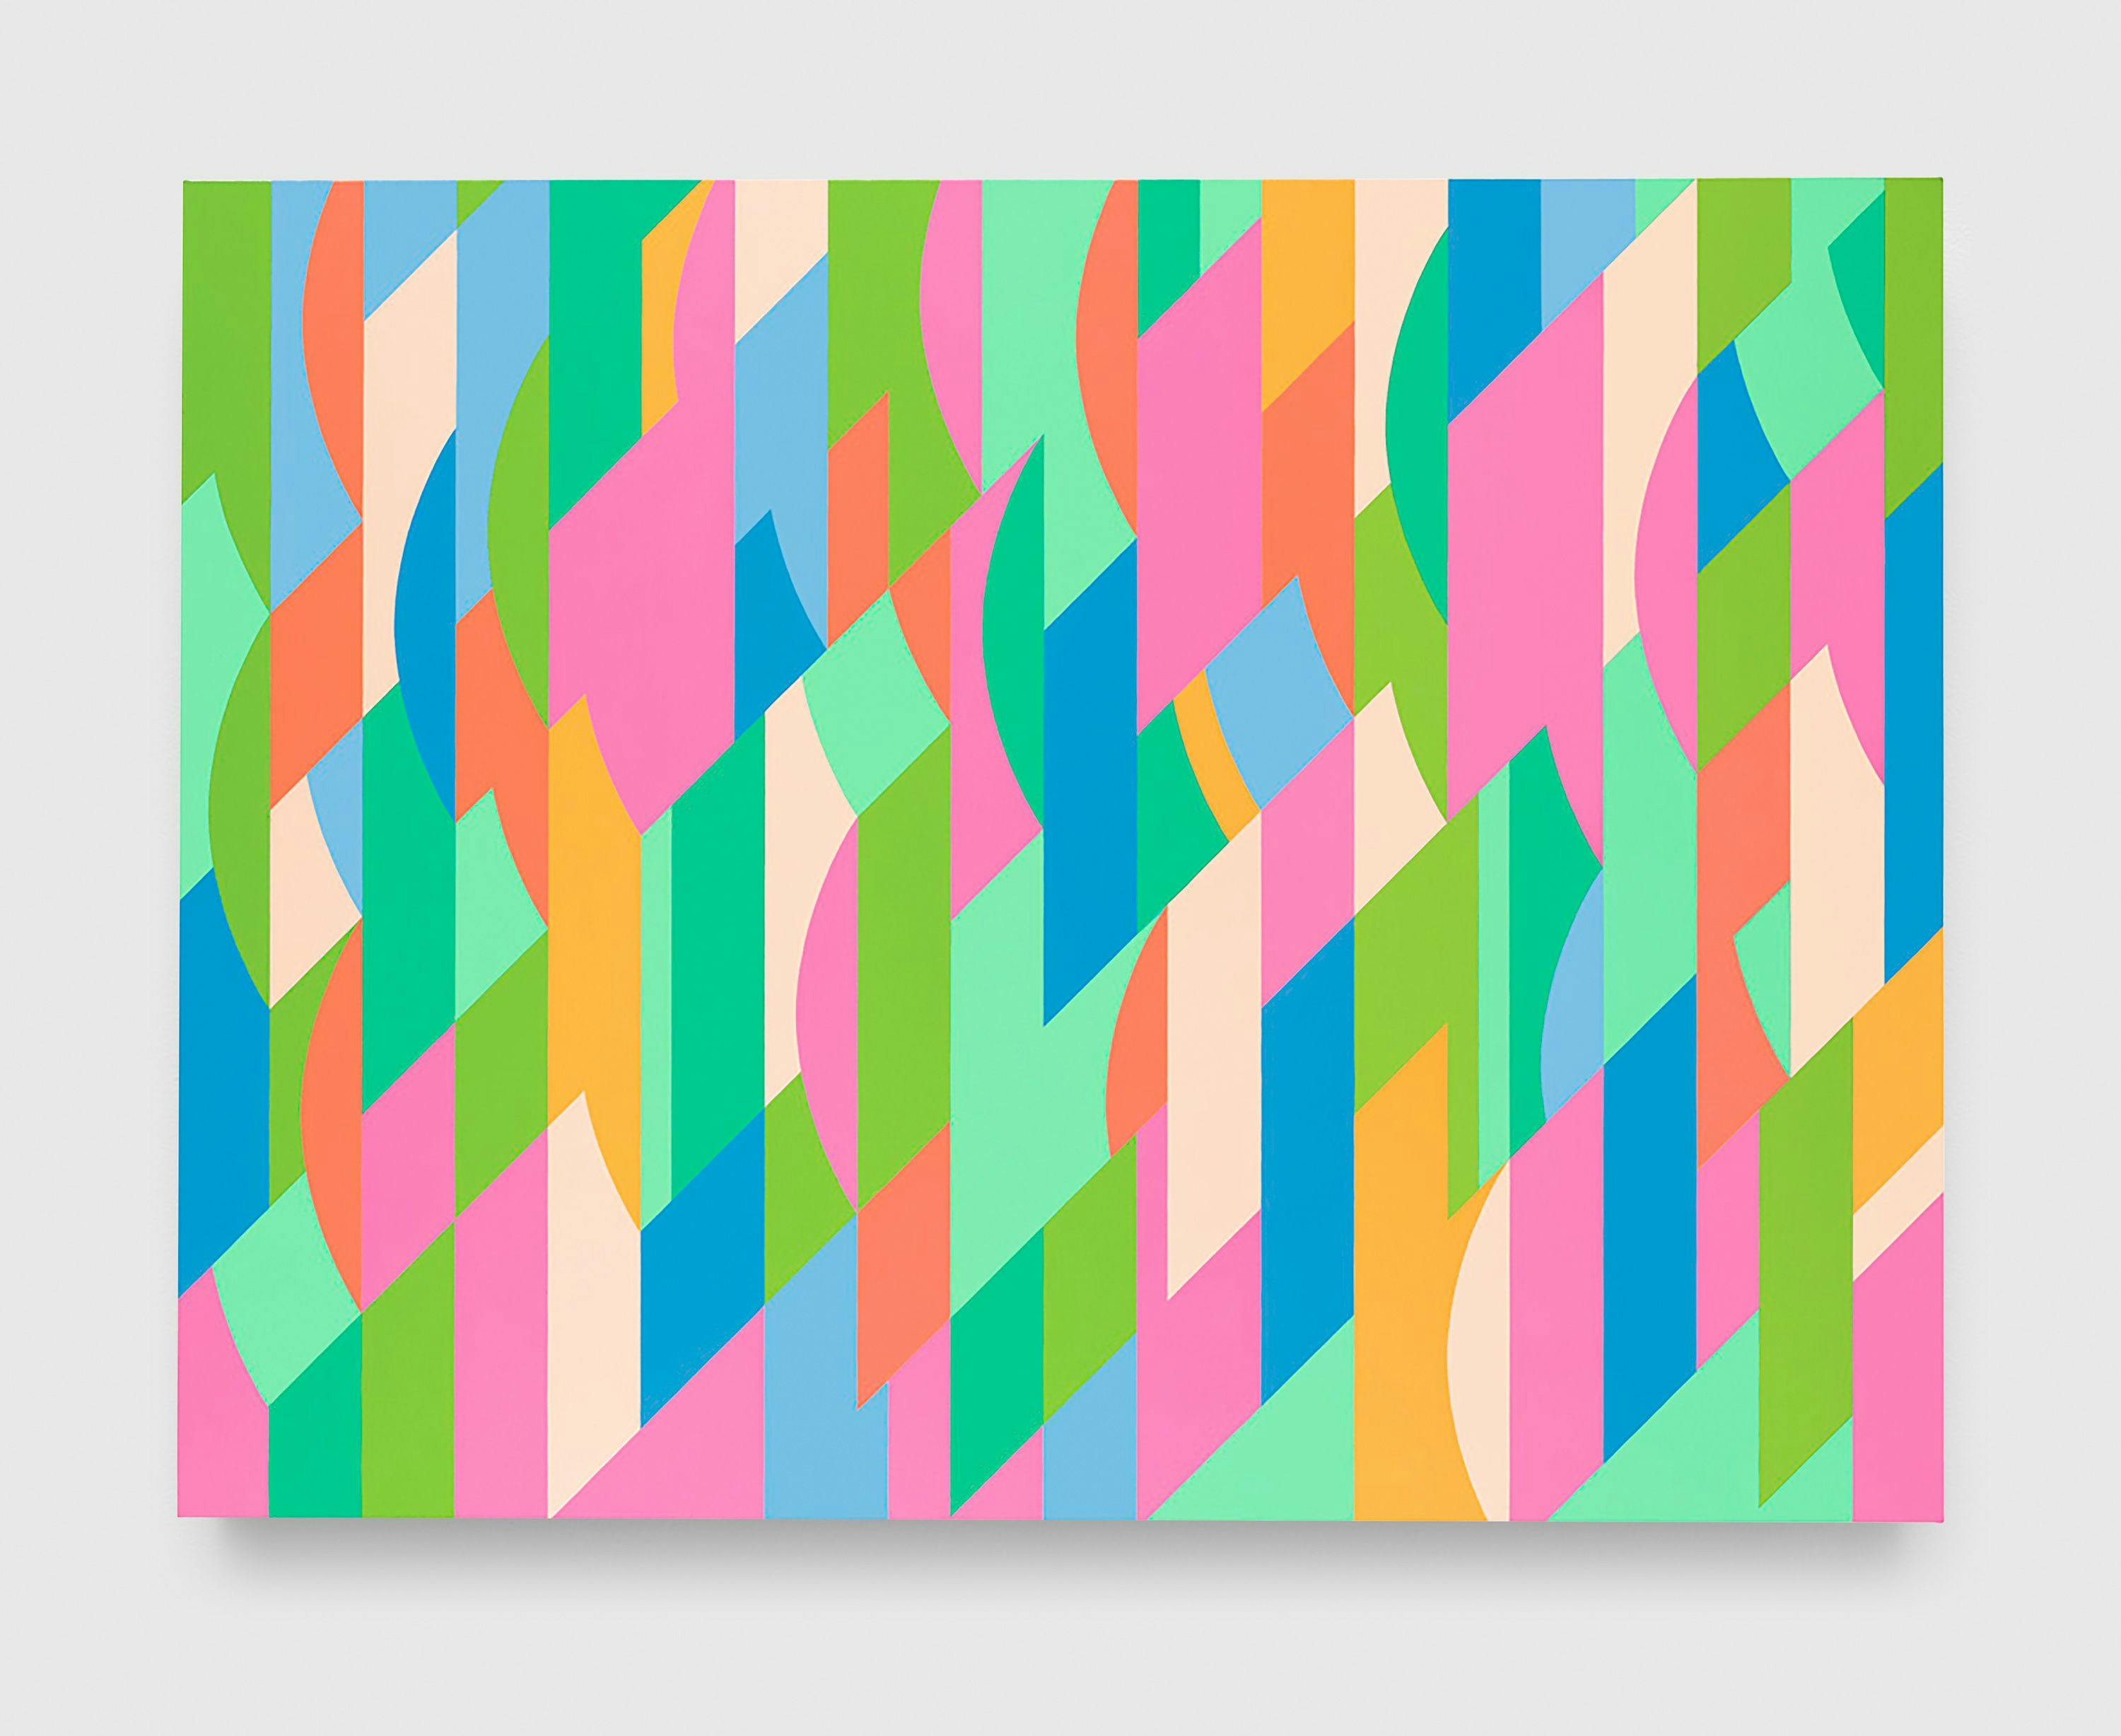 A painting by Bridget Riley, titled Lagoon 1, dated 1997.